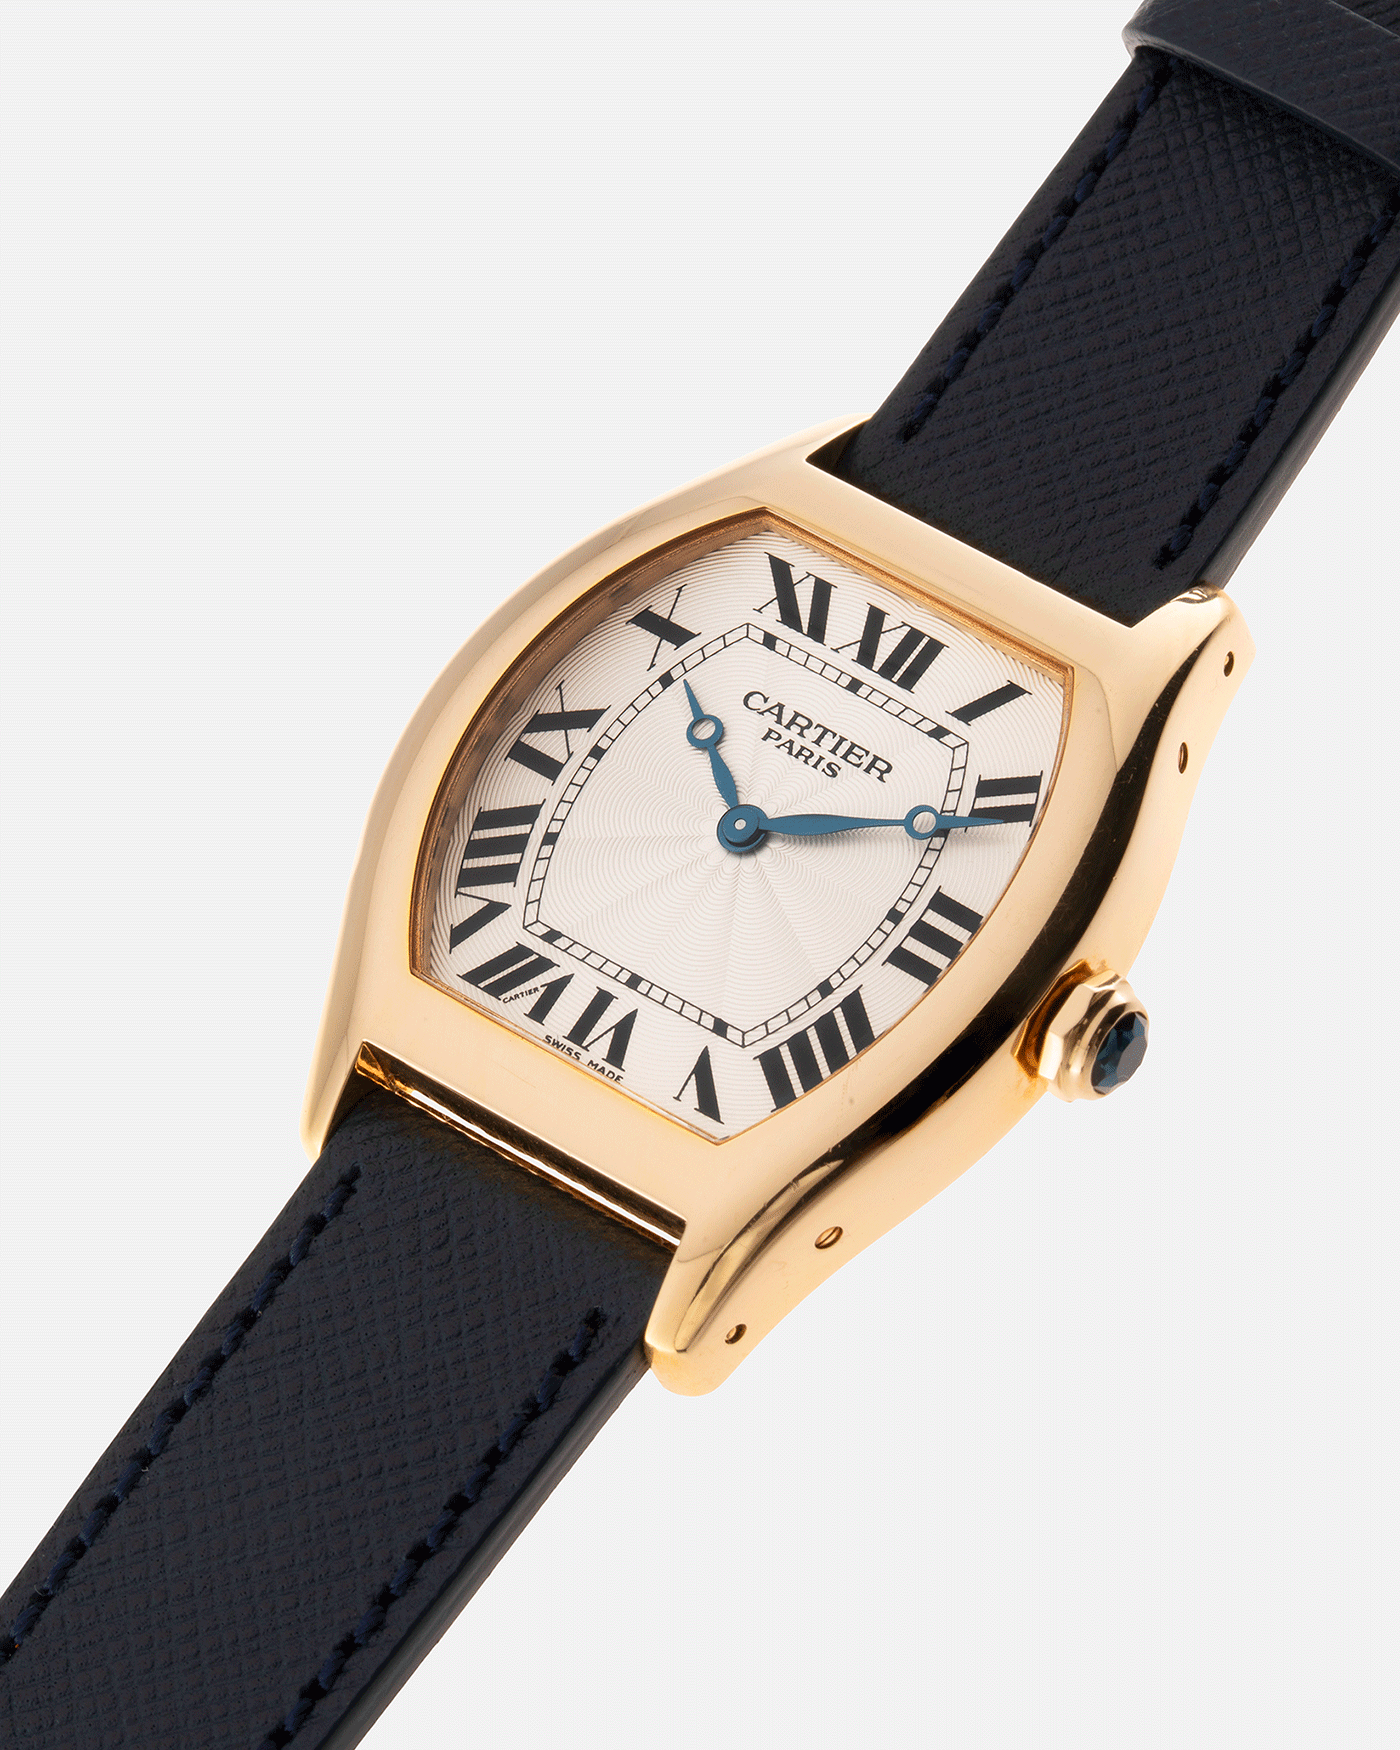 Brand: Cartier Year: 2000’s Model: CPCP Collection Prive Tortue Reference: 2496 Material: 18k Yellow Gold Movement: Cartier Jaeger LeCoultre 9601MC Case Diameter: 43 x 35 mm Strap: Navy Blue Molequin Textured Calf Strap with separate 18k Cartier Yellow Gold Deployant